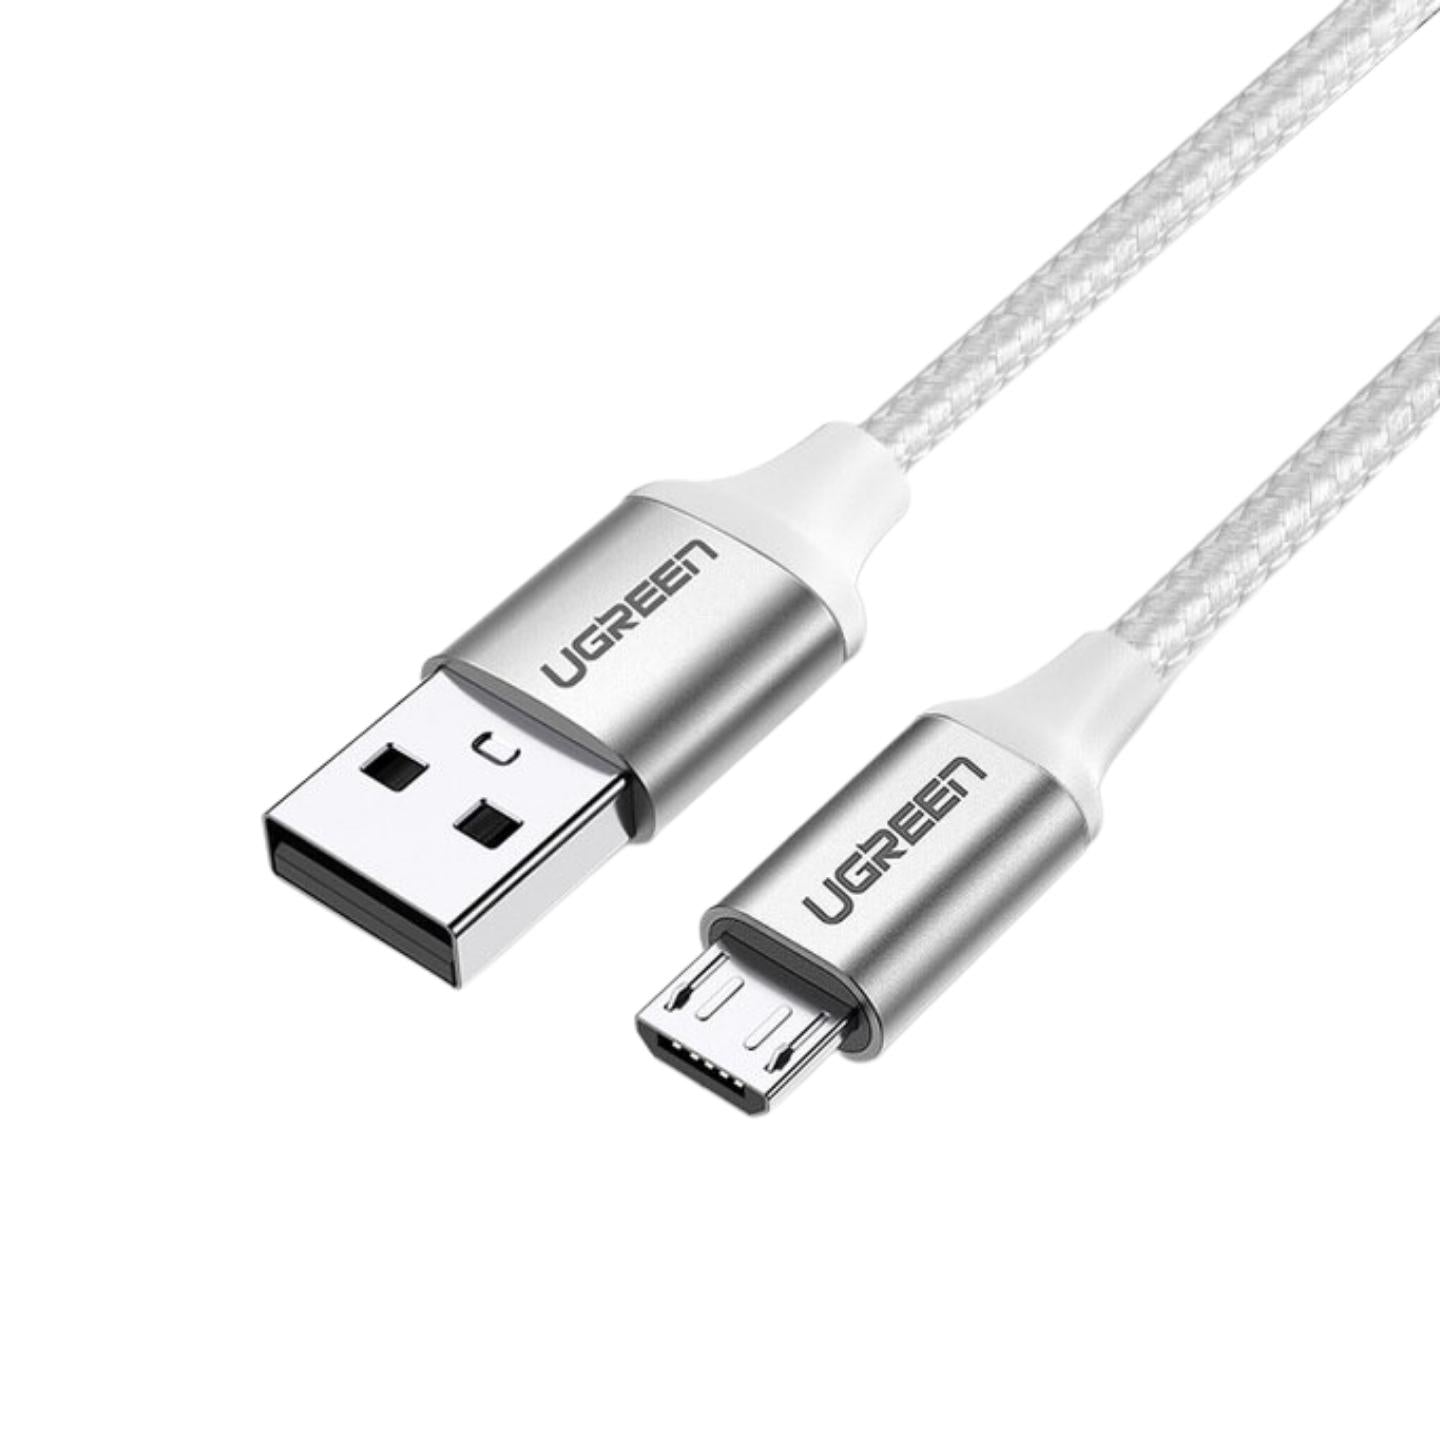 UGREEN USB USB 2.0 2.4A Nickel Plated Cable with 480 – JG